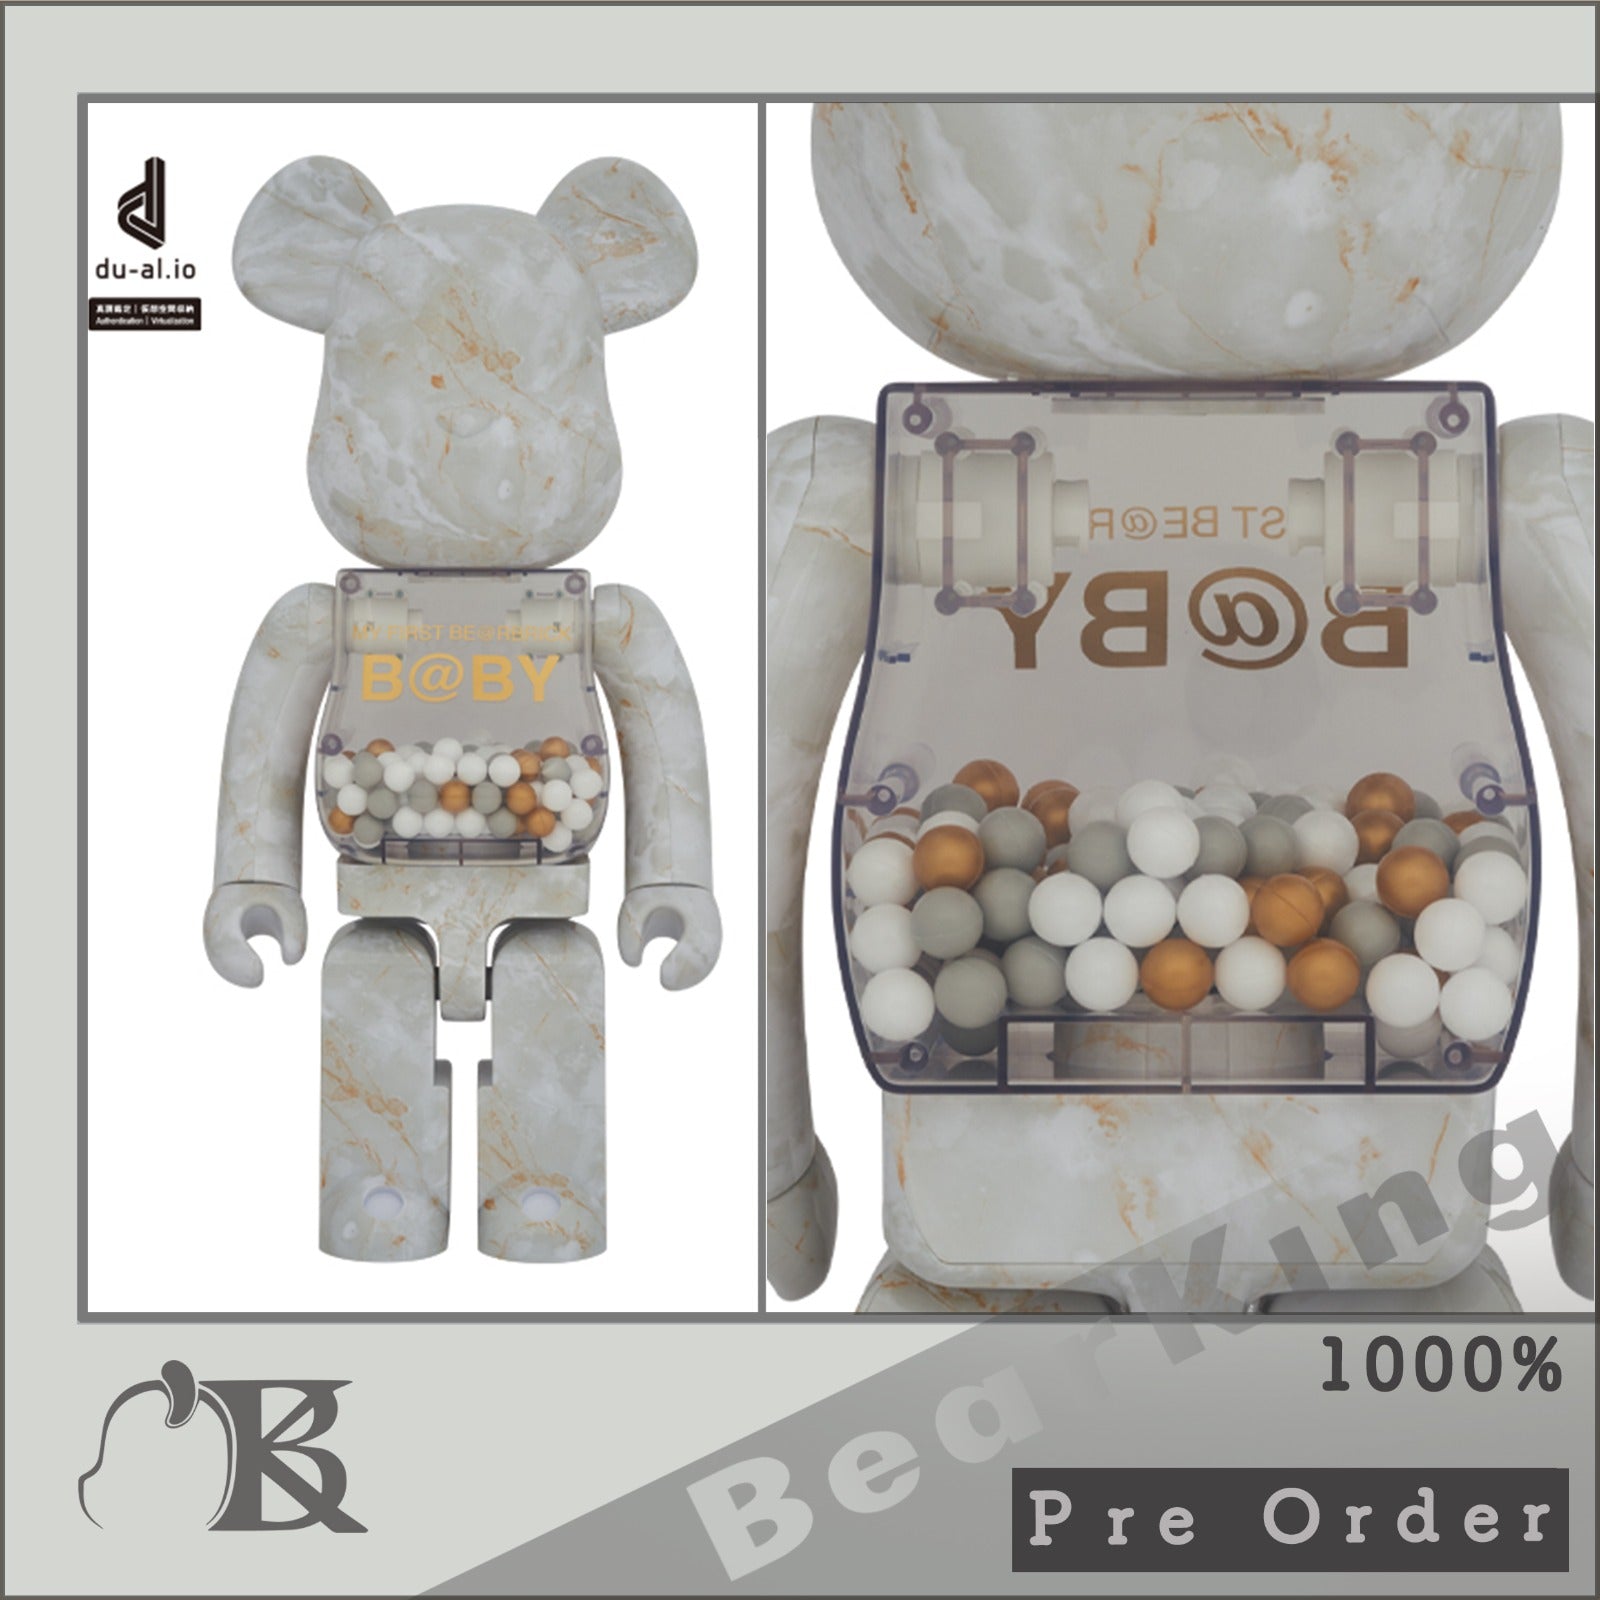 BE@RBRICK MY FIRST BE@RBRICK B@BY MARBLE(大理石) Ver. 1000％